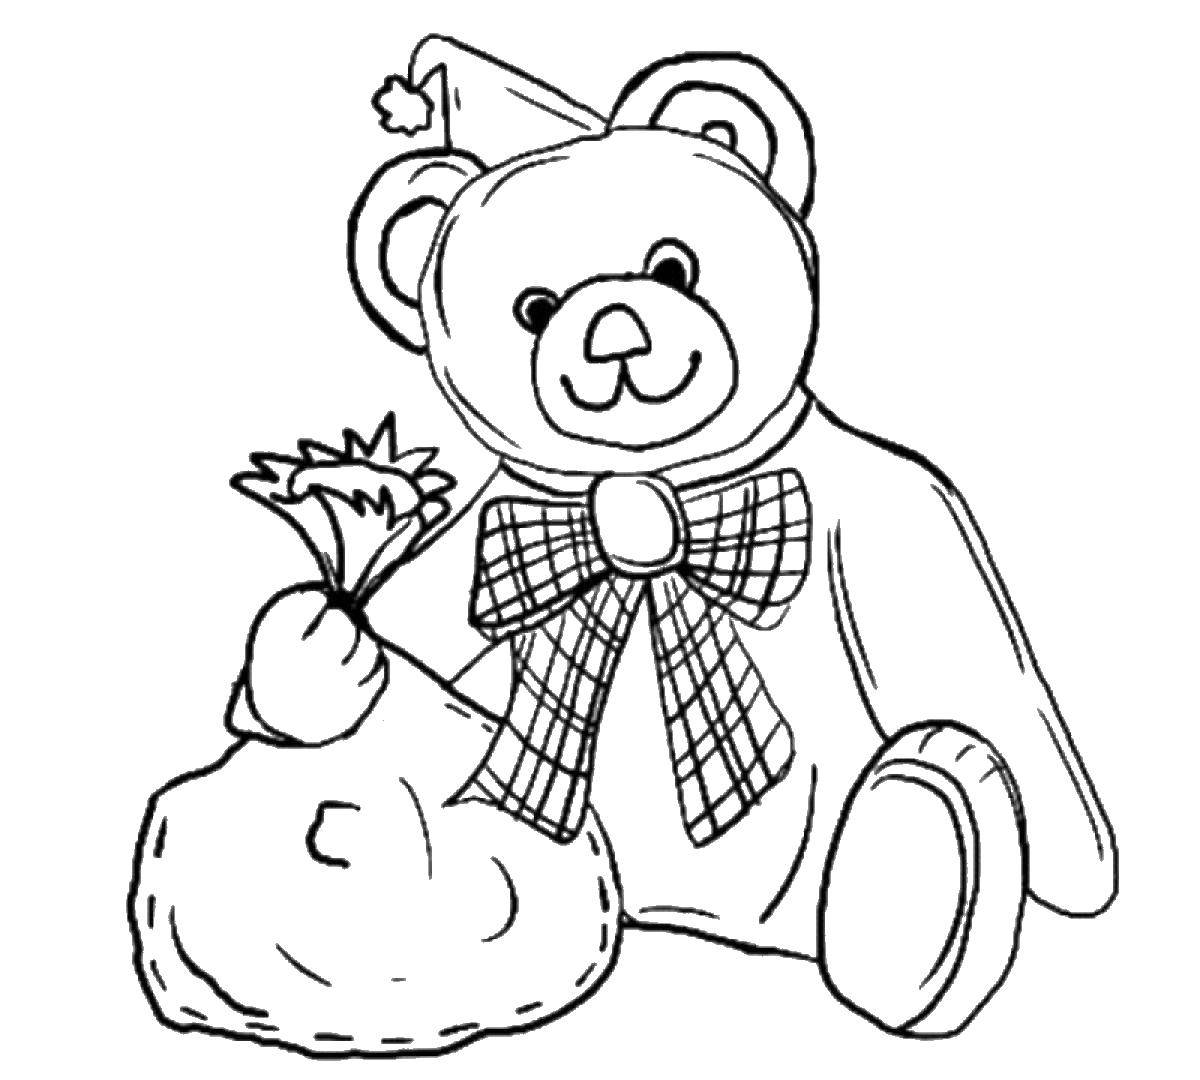 Coloring Teddy bear with gifts. Category gifts. Tags:  Gifts, holiday.